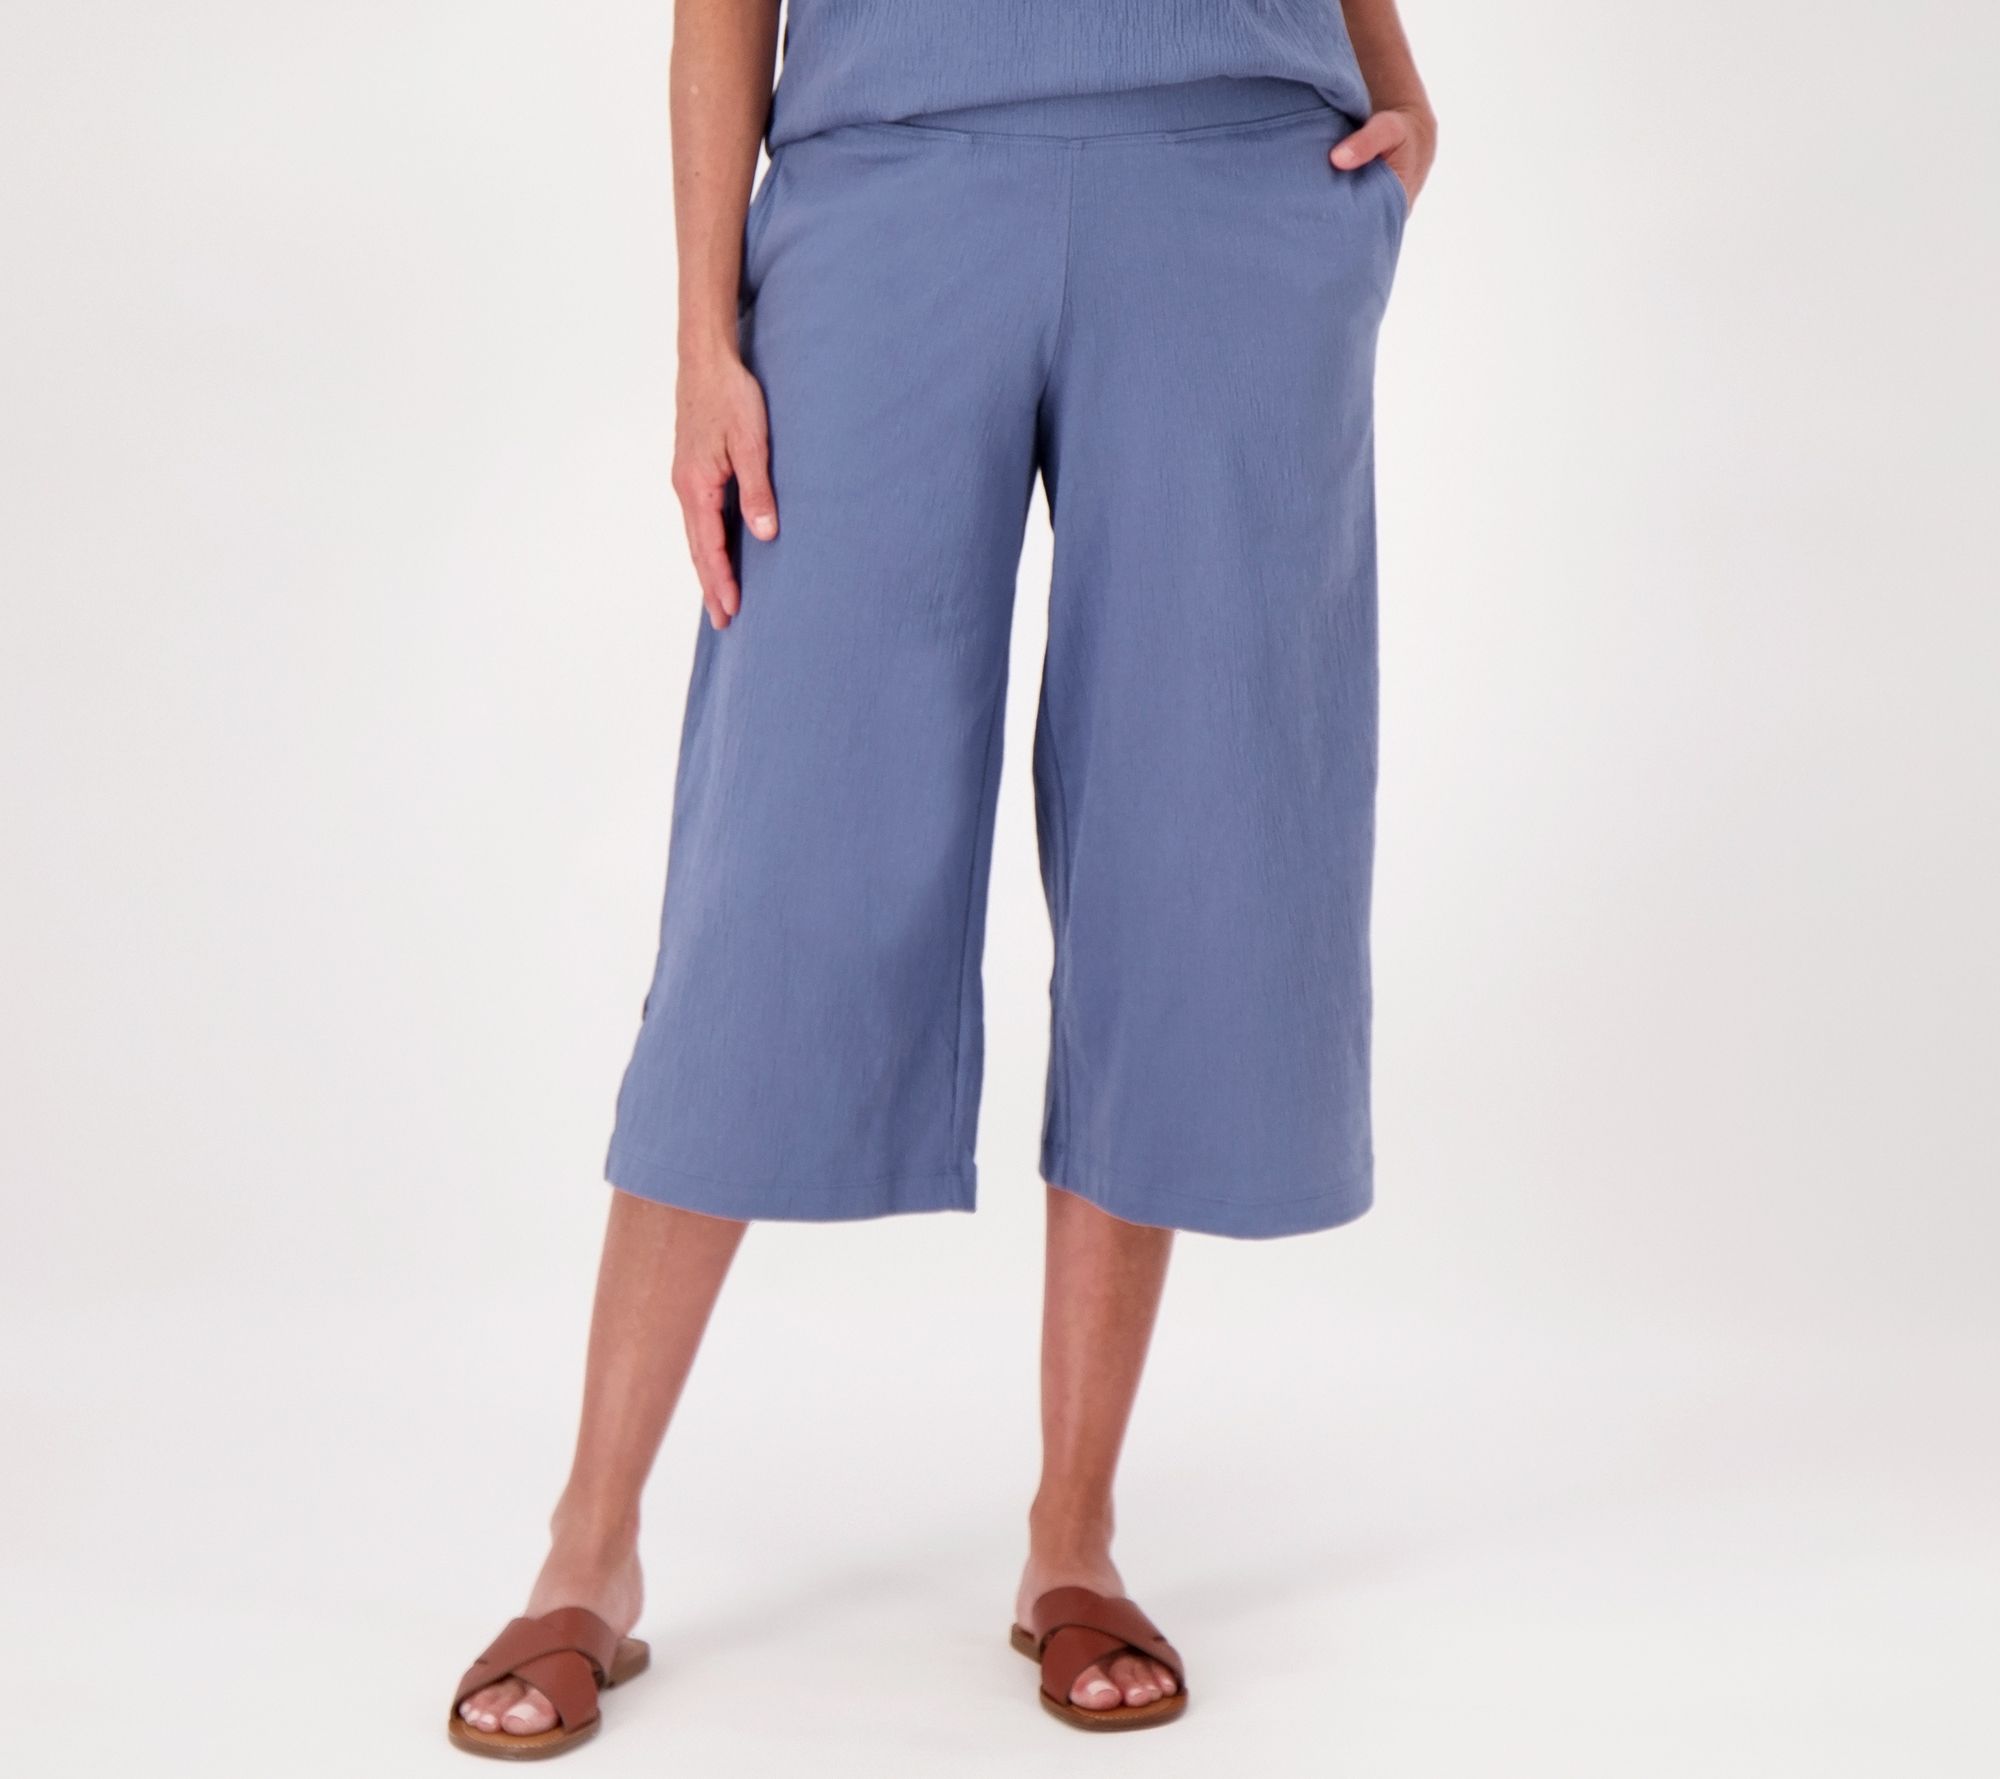 Cuddl Duds Crinkle Jersey Cropped Pants with Side Slits - QVC.com